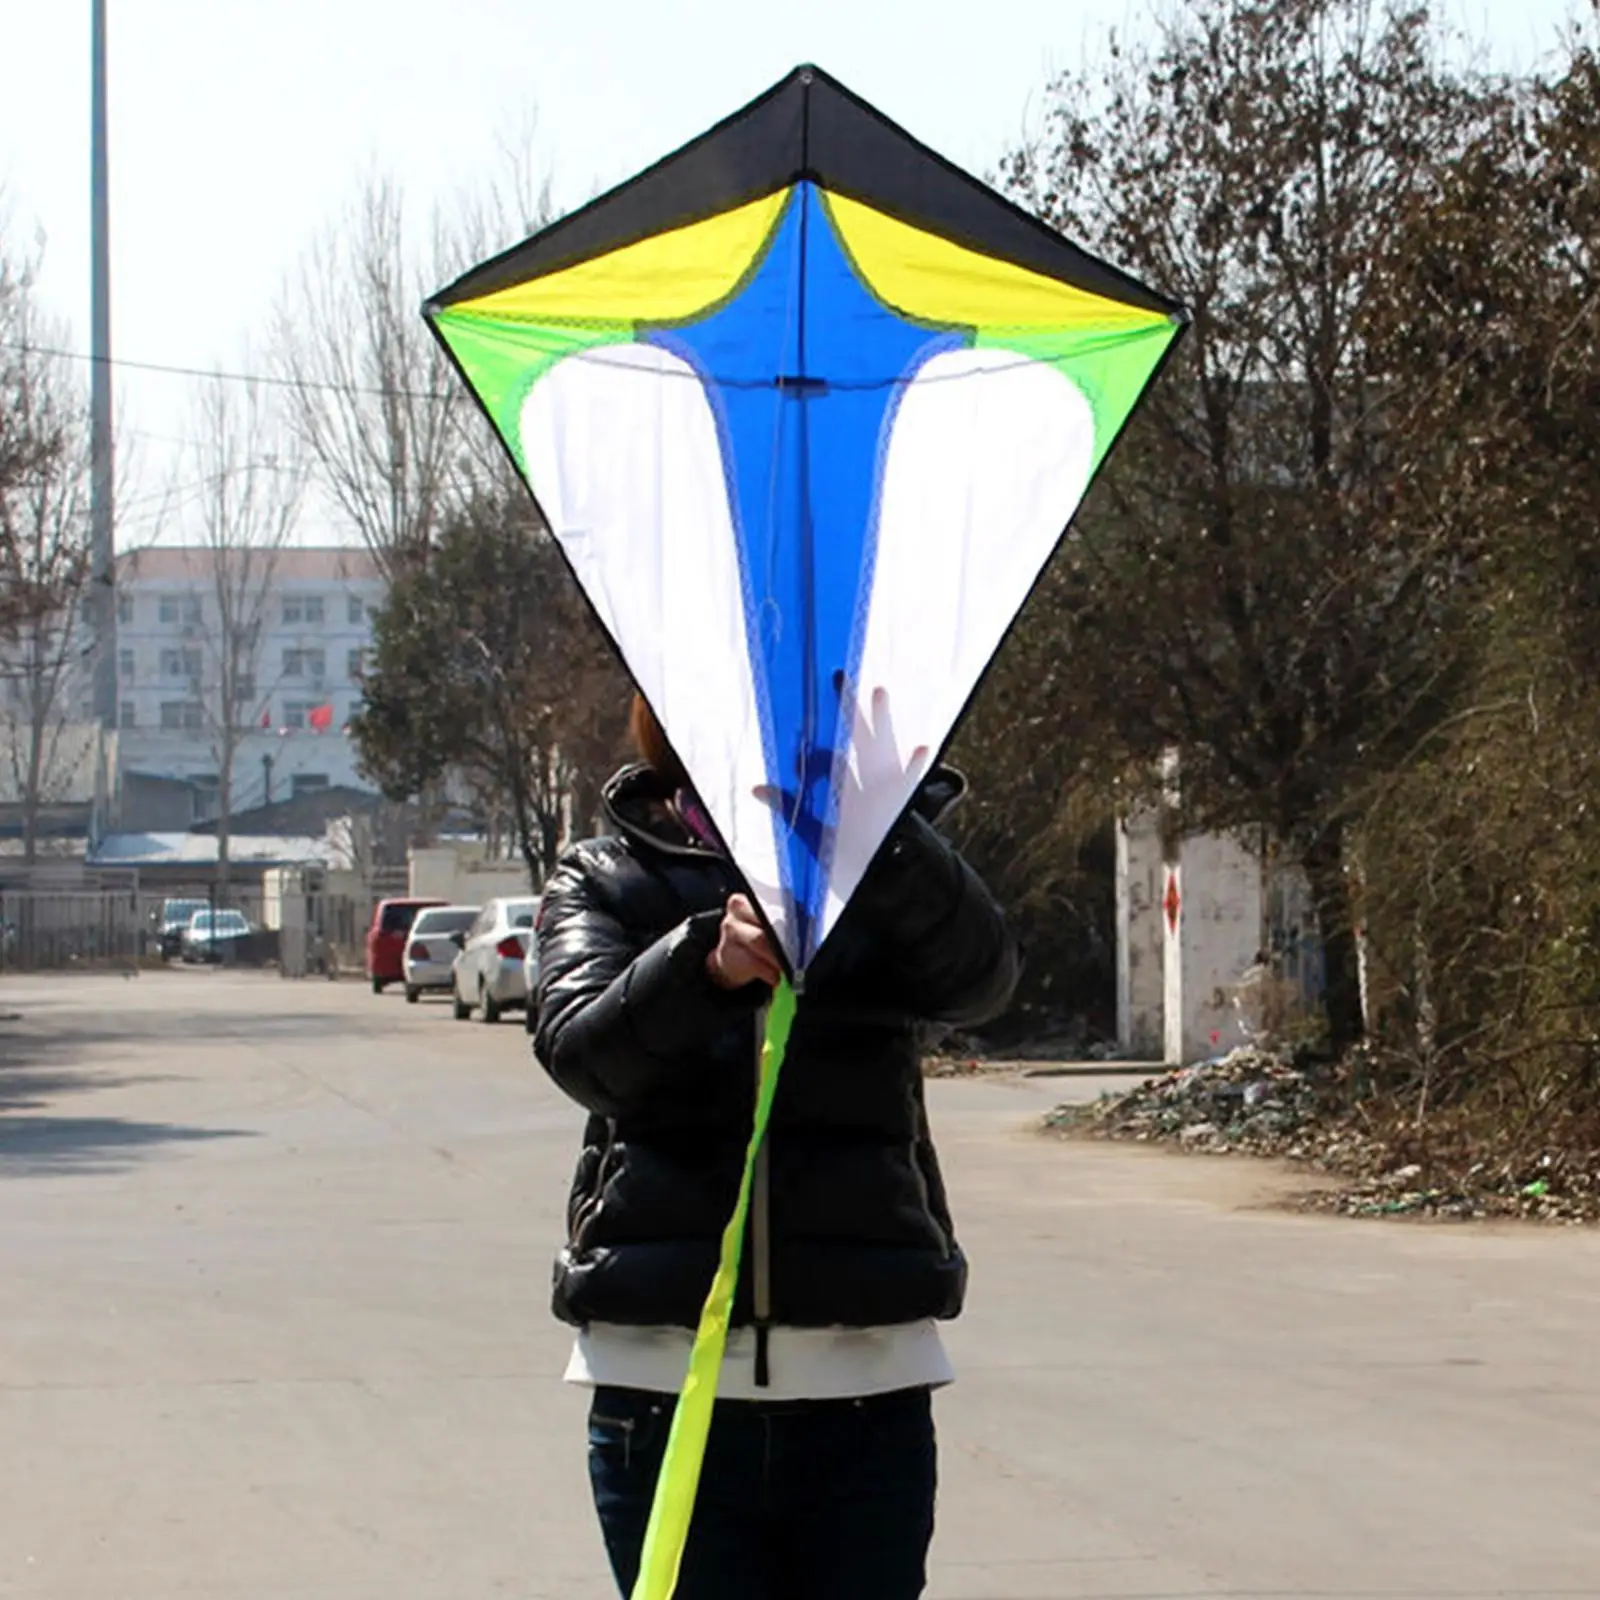 Rainbow Rhombus Kite Fly Kites with Tail Easy to Fly Durable Toys for Family Outdoor Activities Childhood Memories Garden Sports